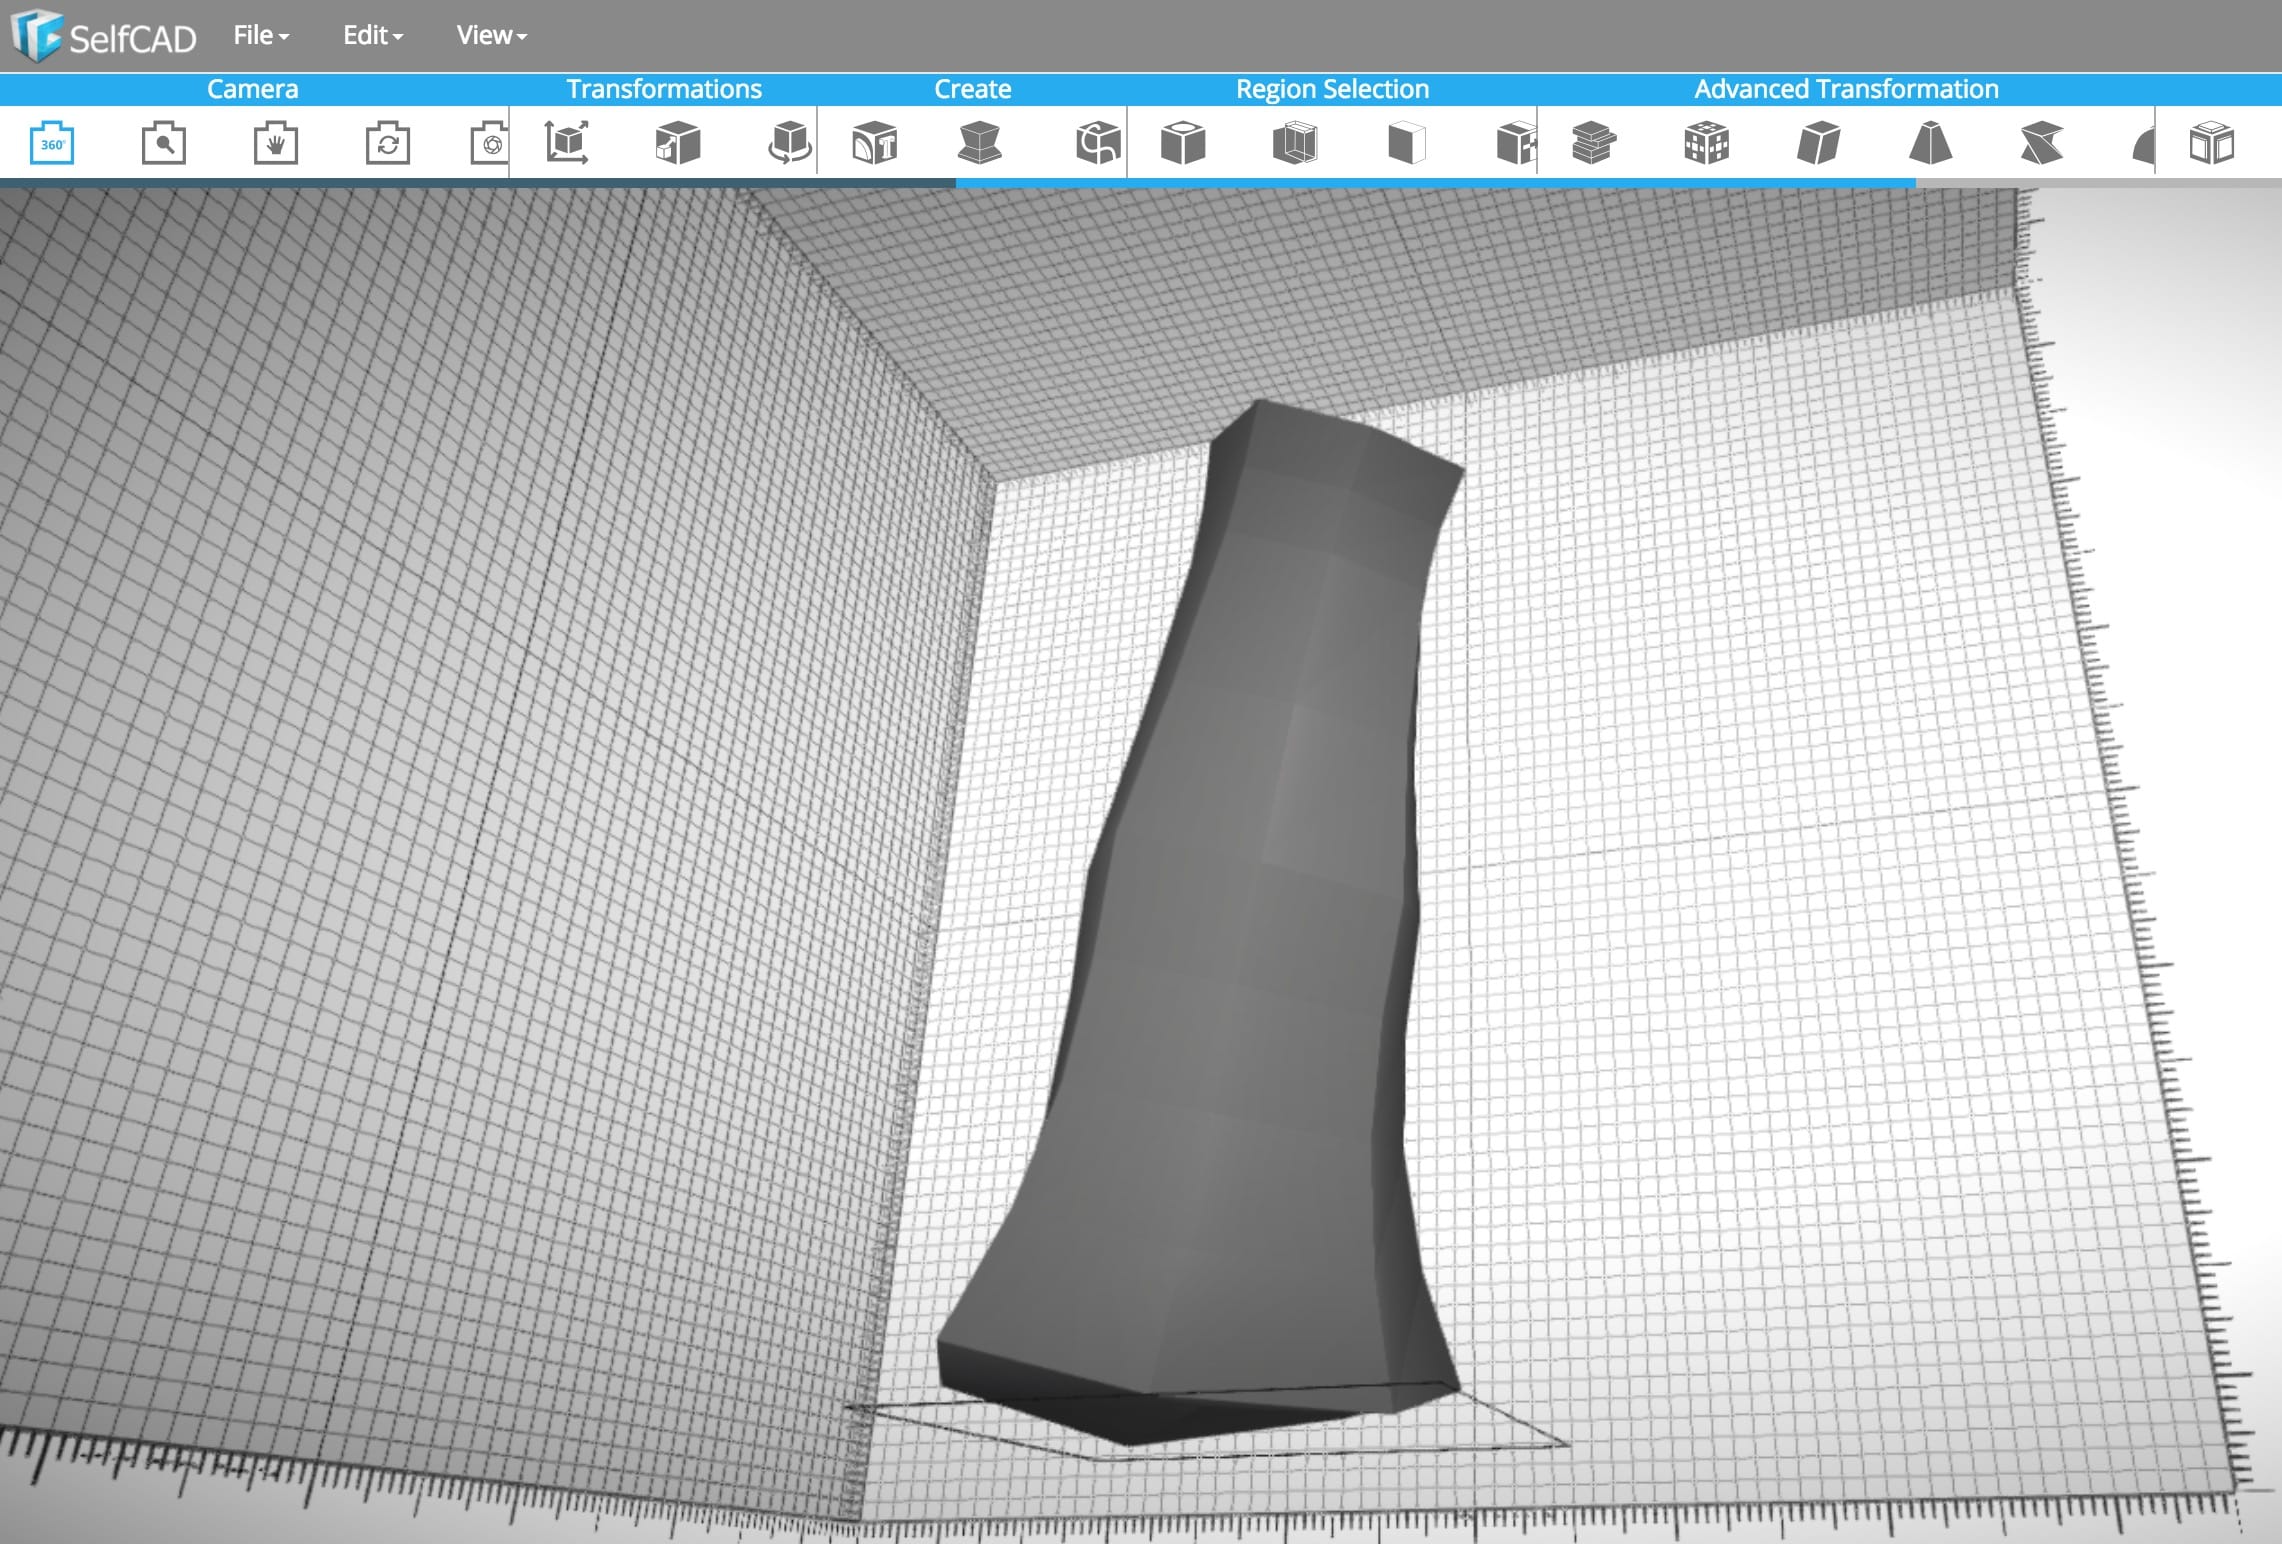  Designing a vase shape in 3D using the new SelfCAD 3D modeling service 